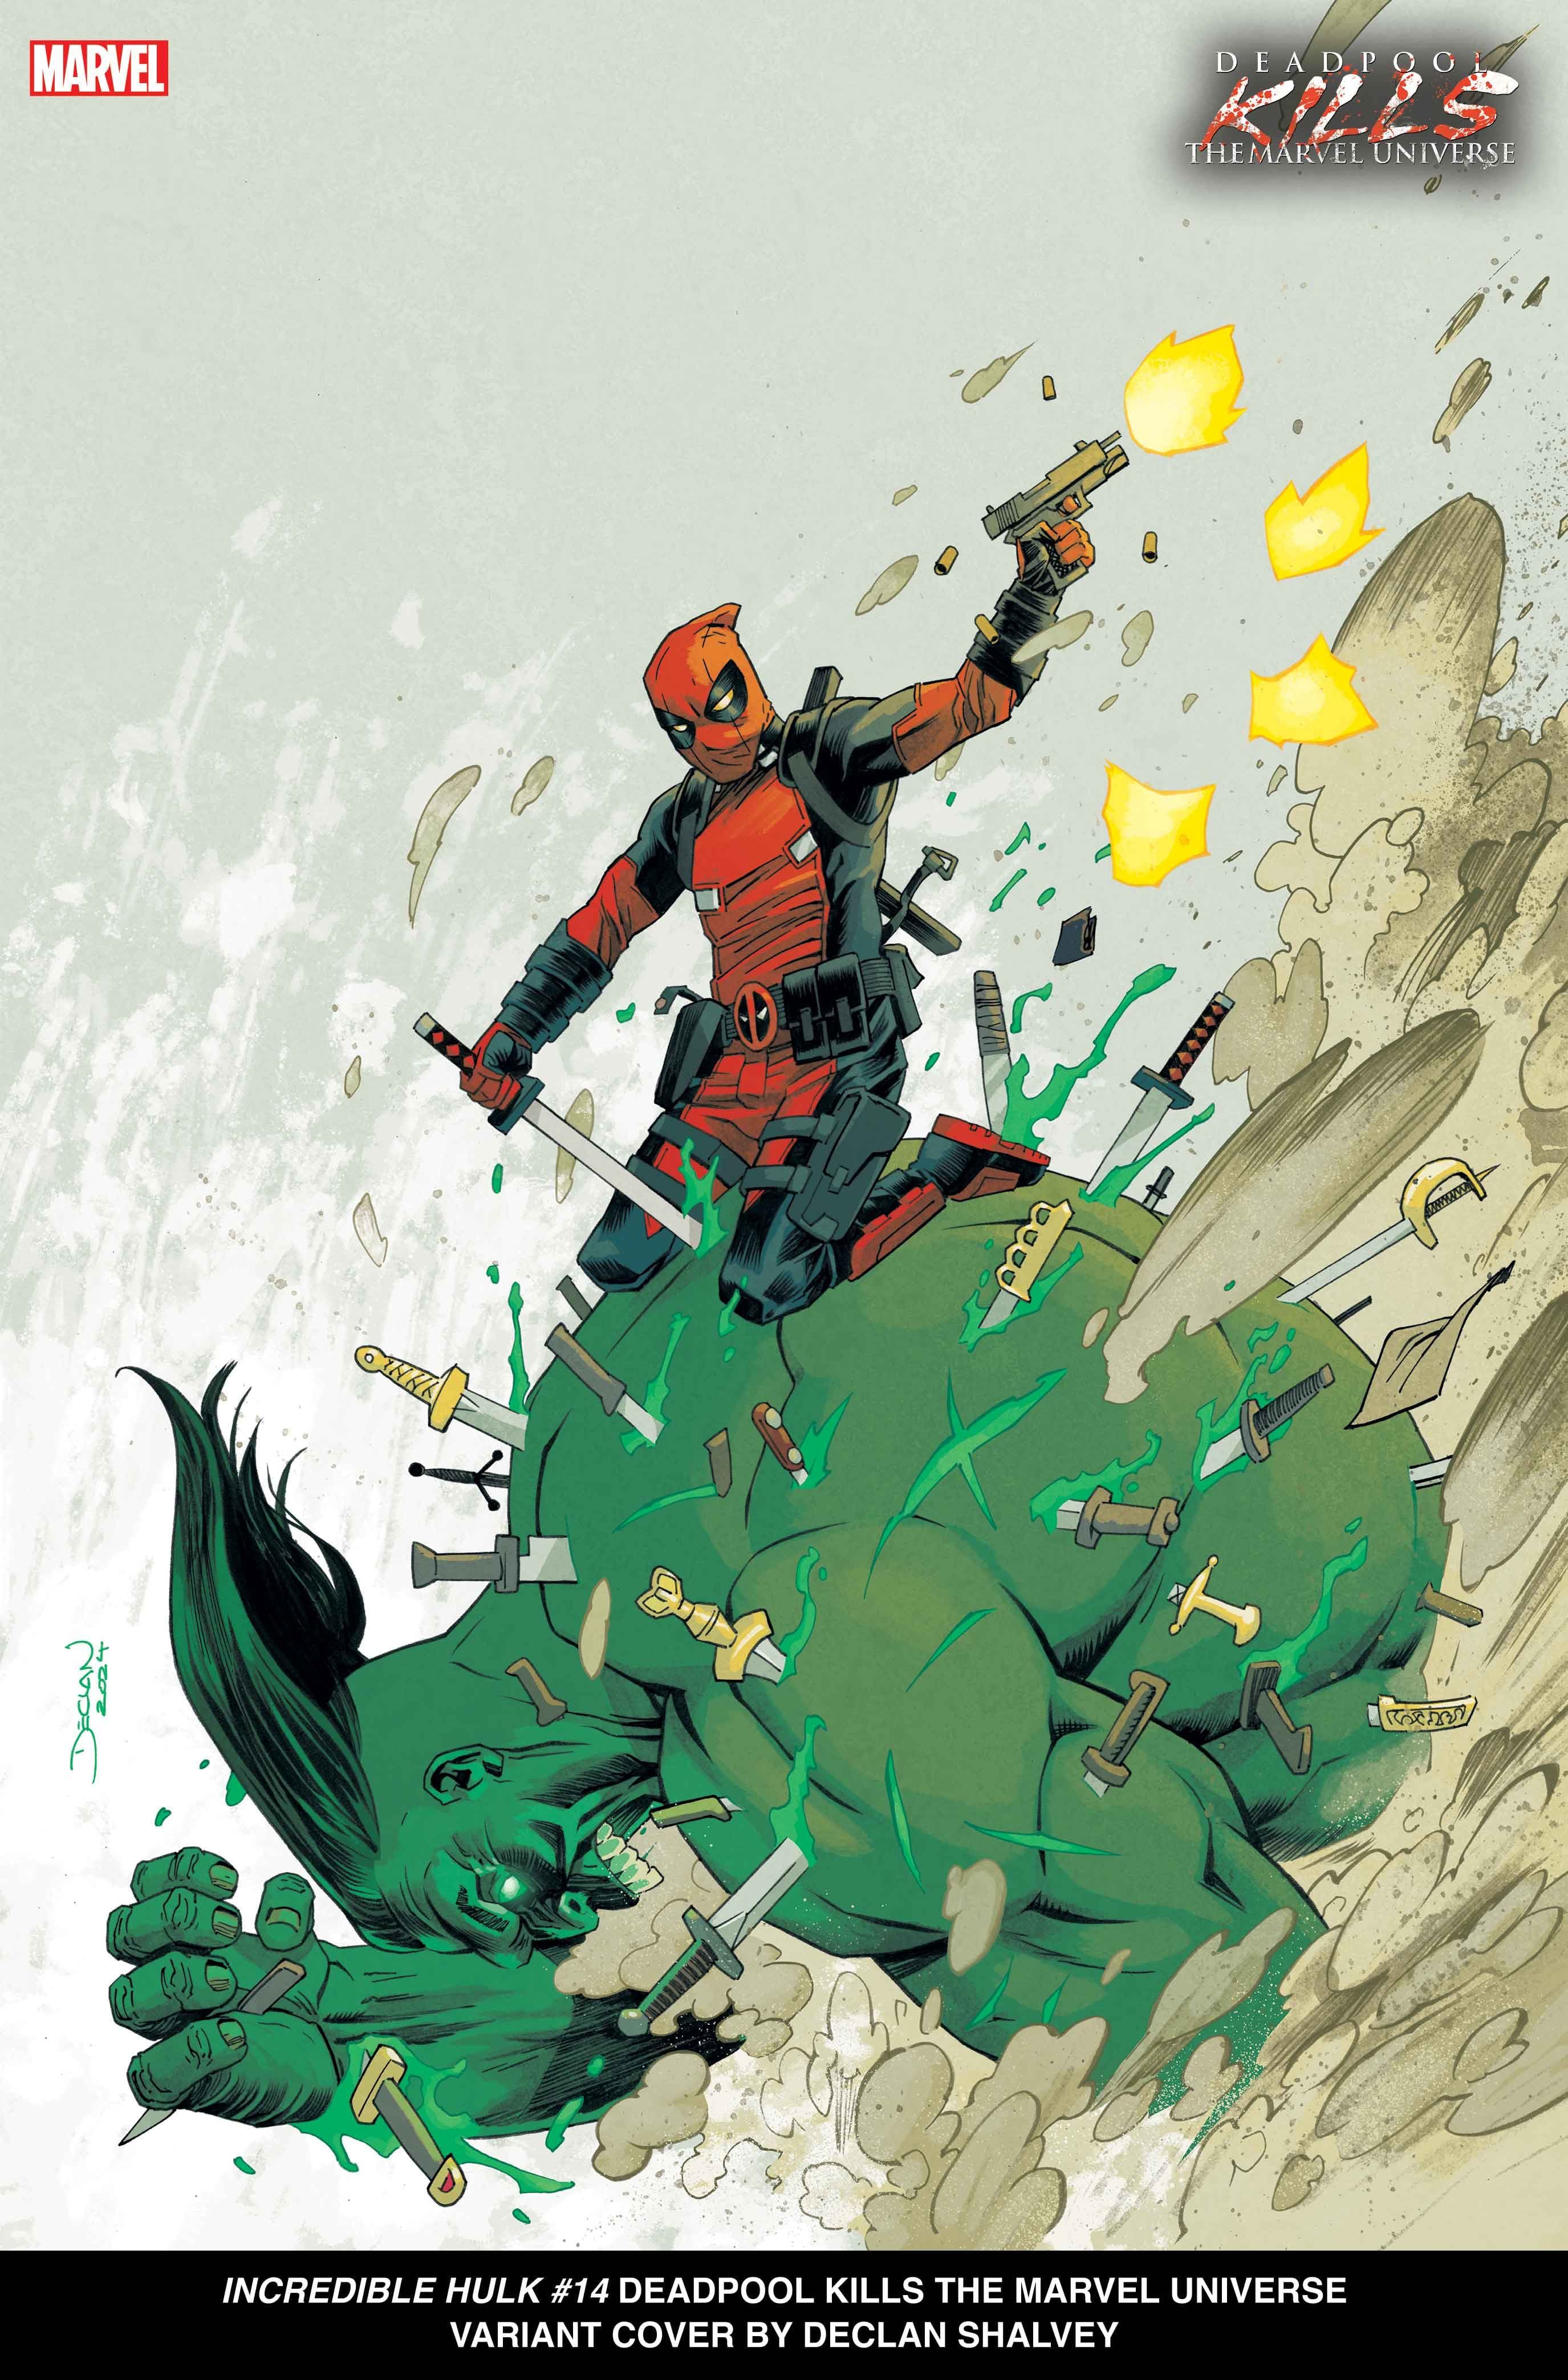 INCREDIBLE HULK #14 Deadpool Kills the Marvel Universe Variant Cover by Declan Shalvey